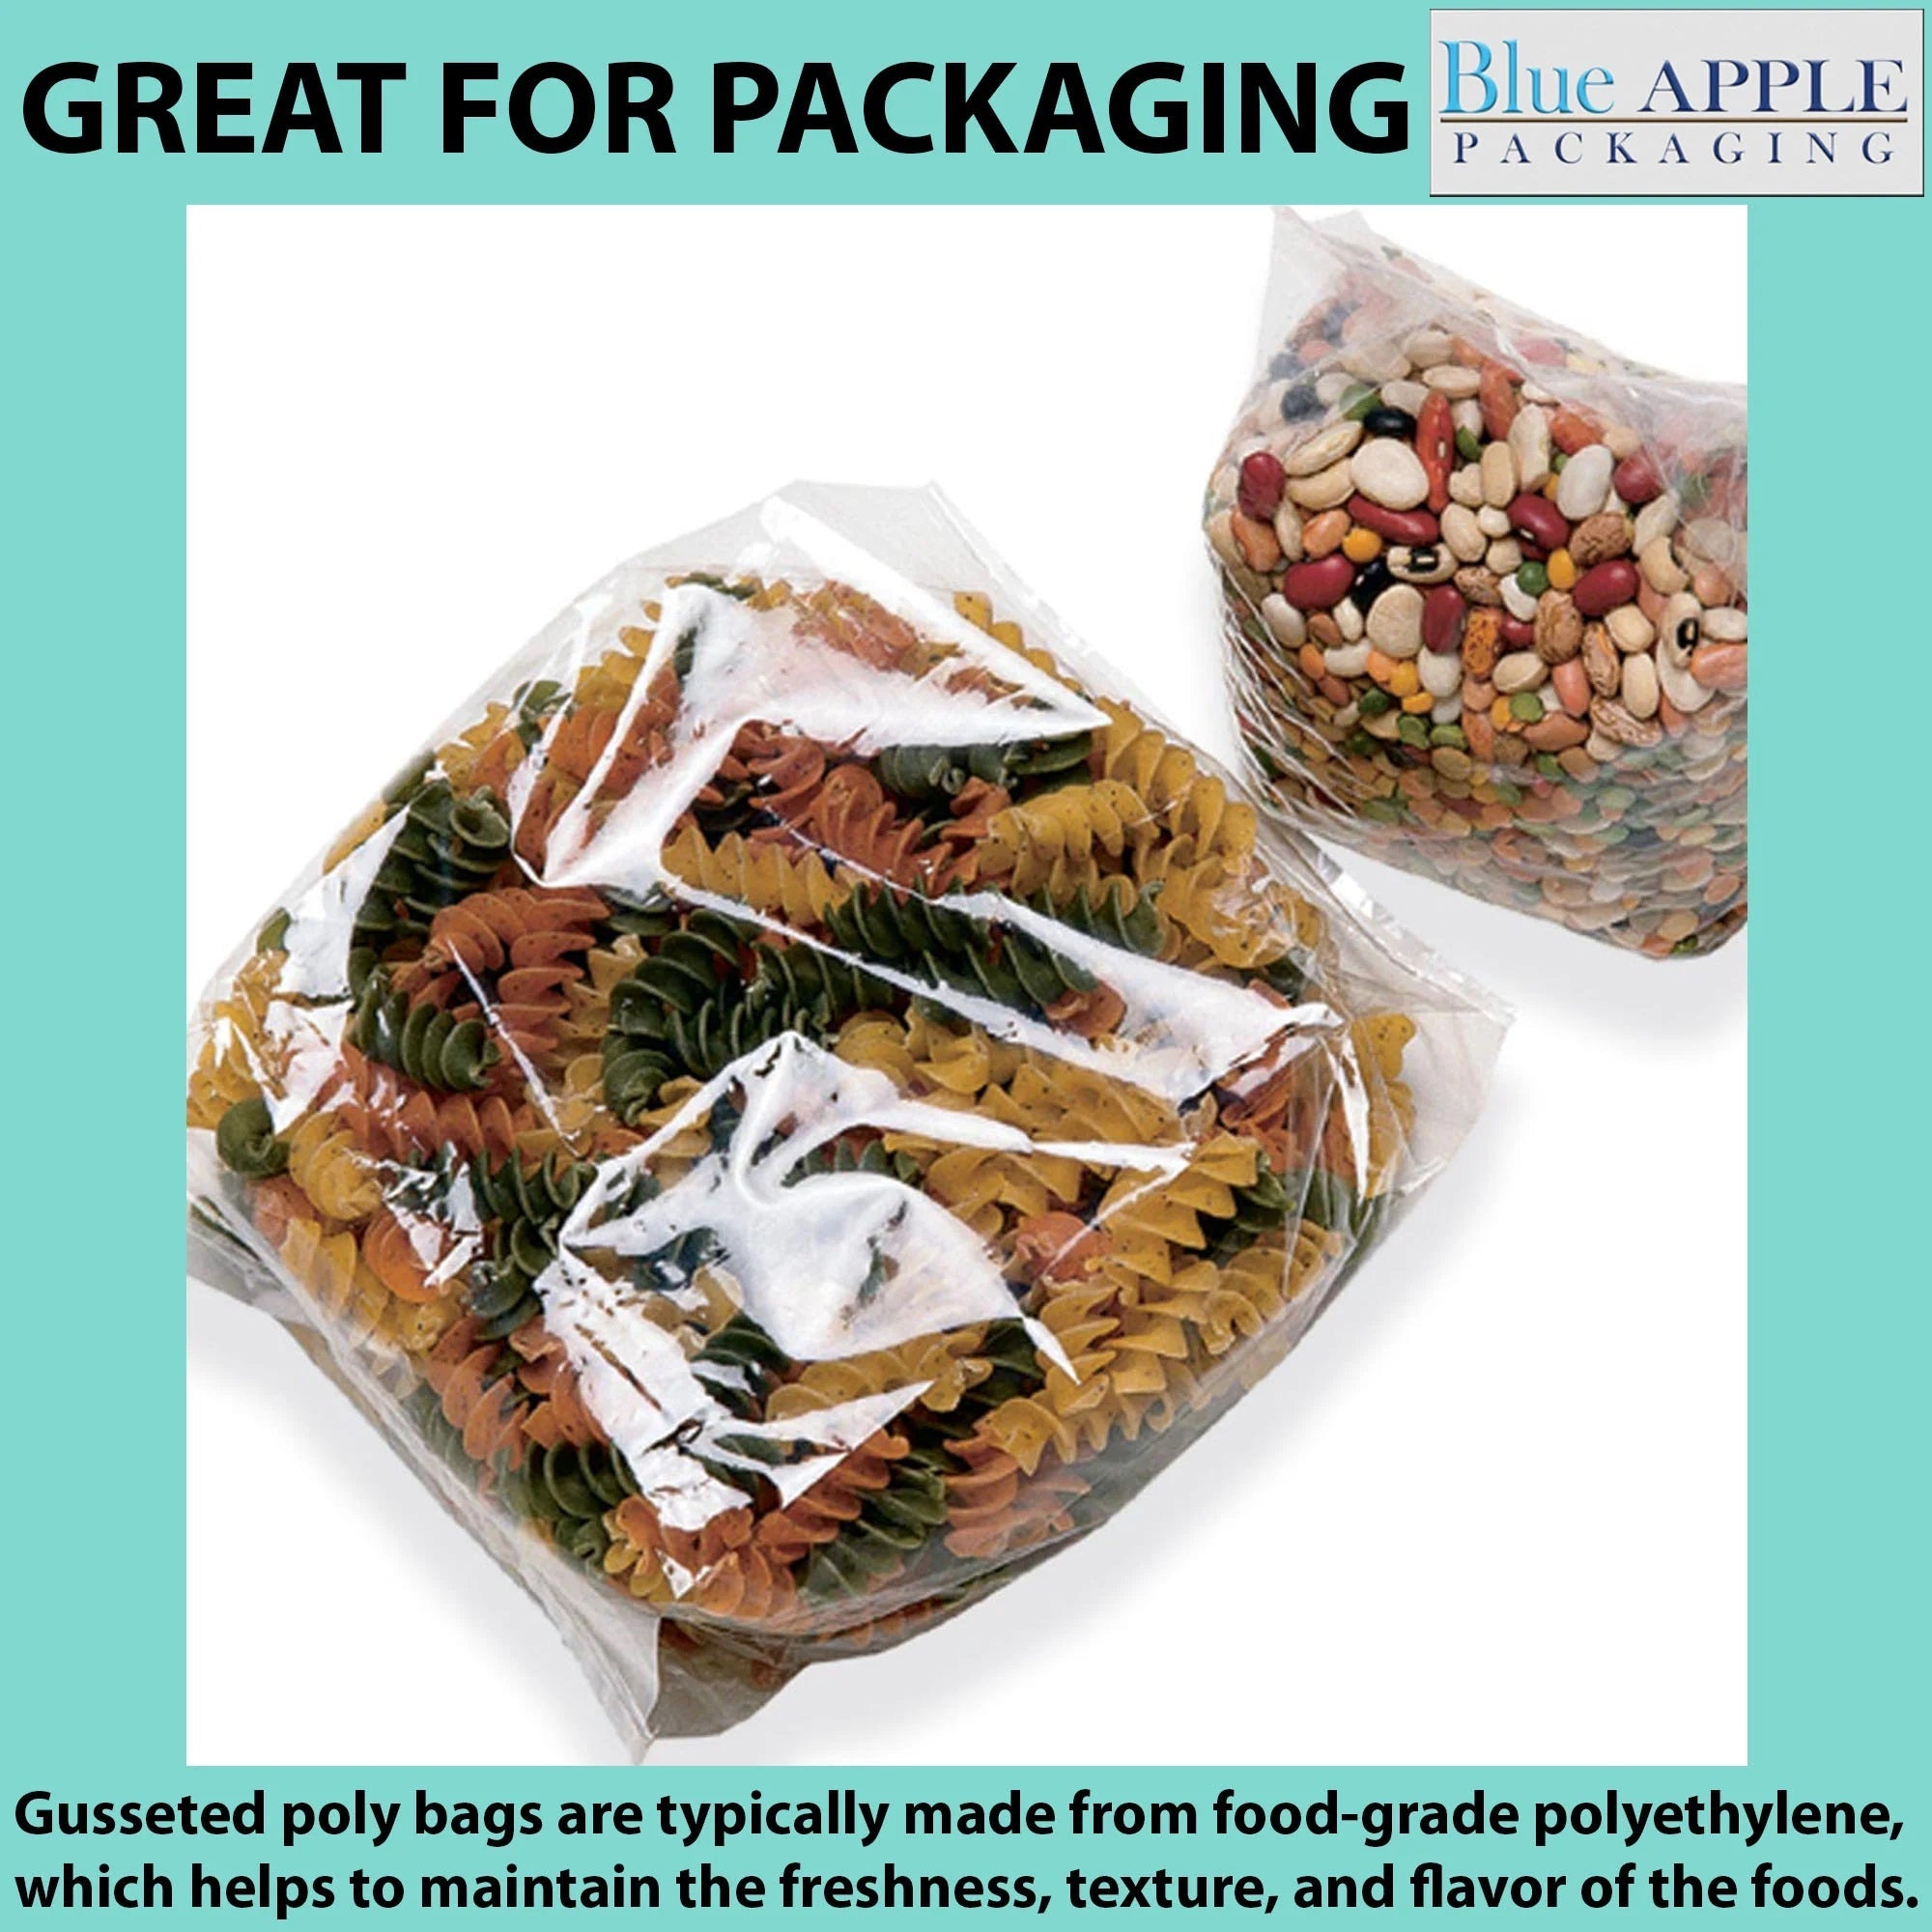 Gusseted Polypropylene Bags 1.5 Mil 10 inch X 8 inch X 24 inch Size